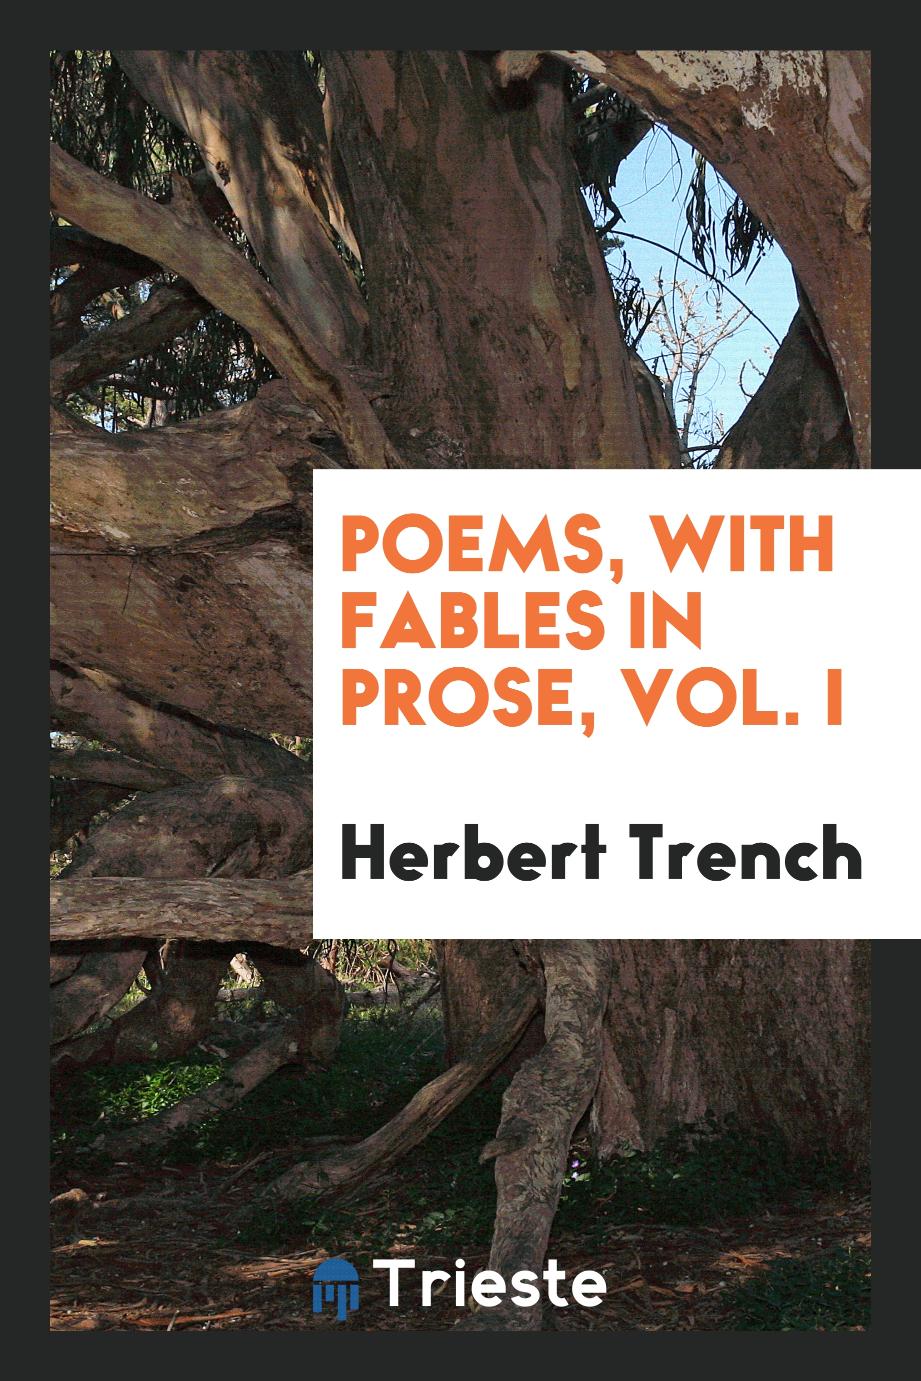 Poems, with fables in prose, Vol. I